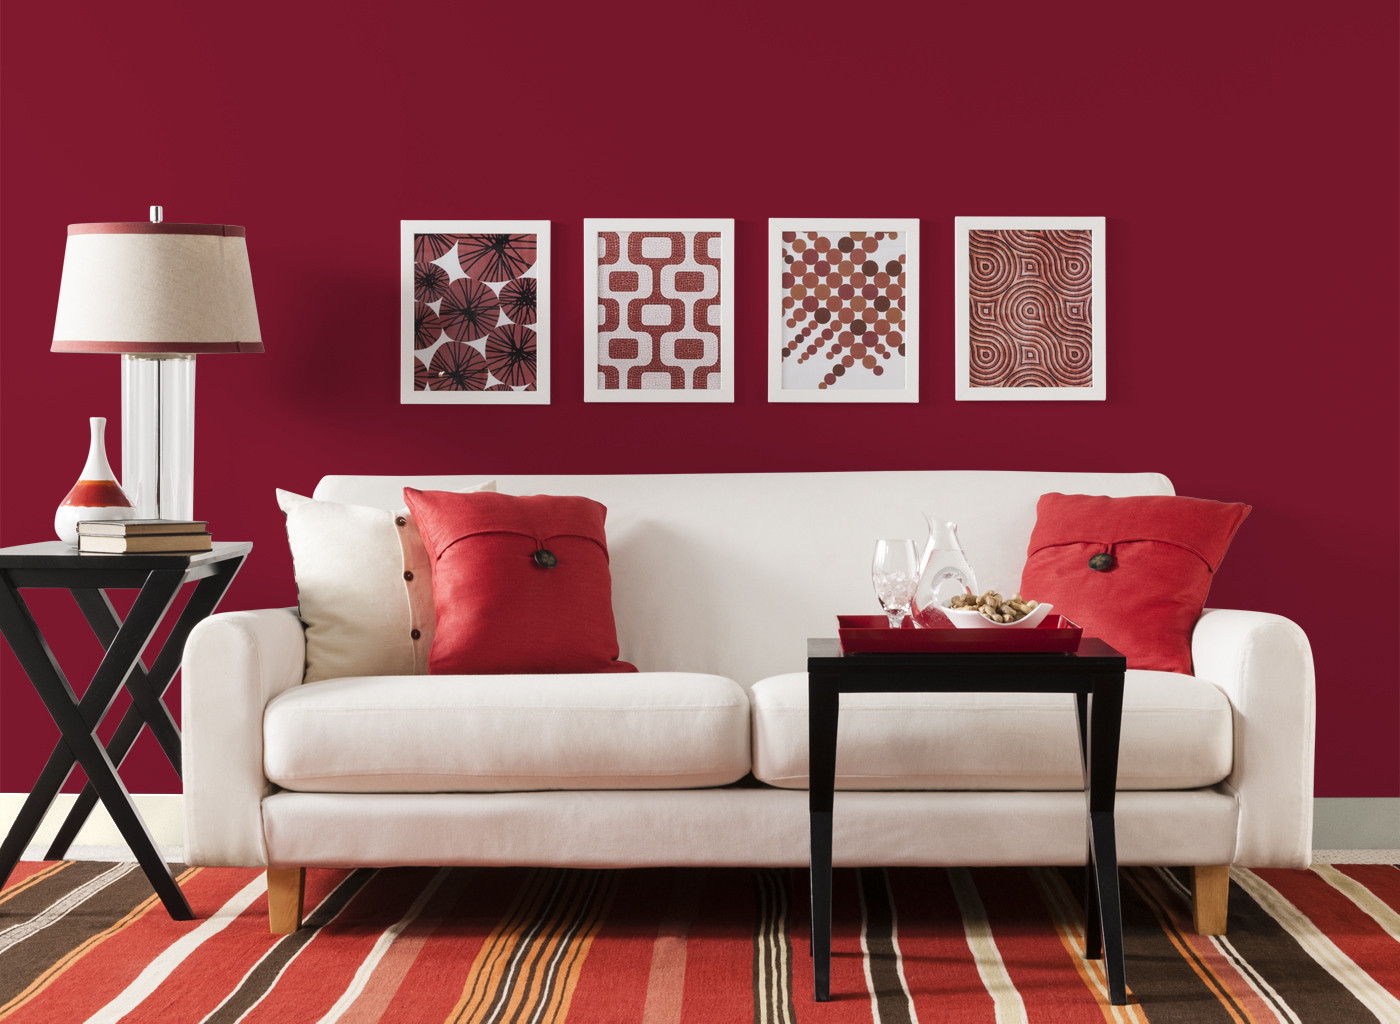 Colors For A Living Room
 Best Paint Color for Living Room Ideas to Decorate Living